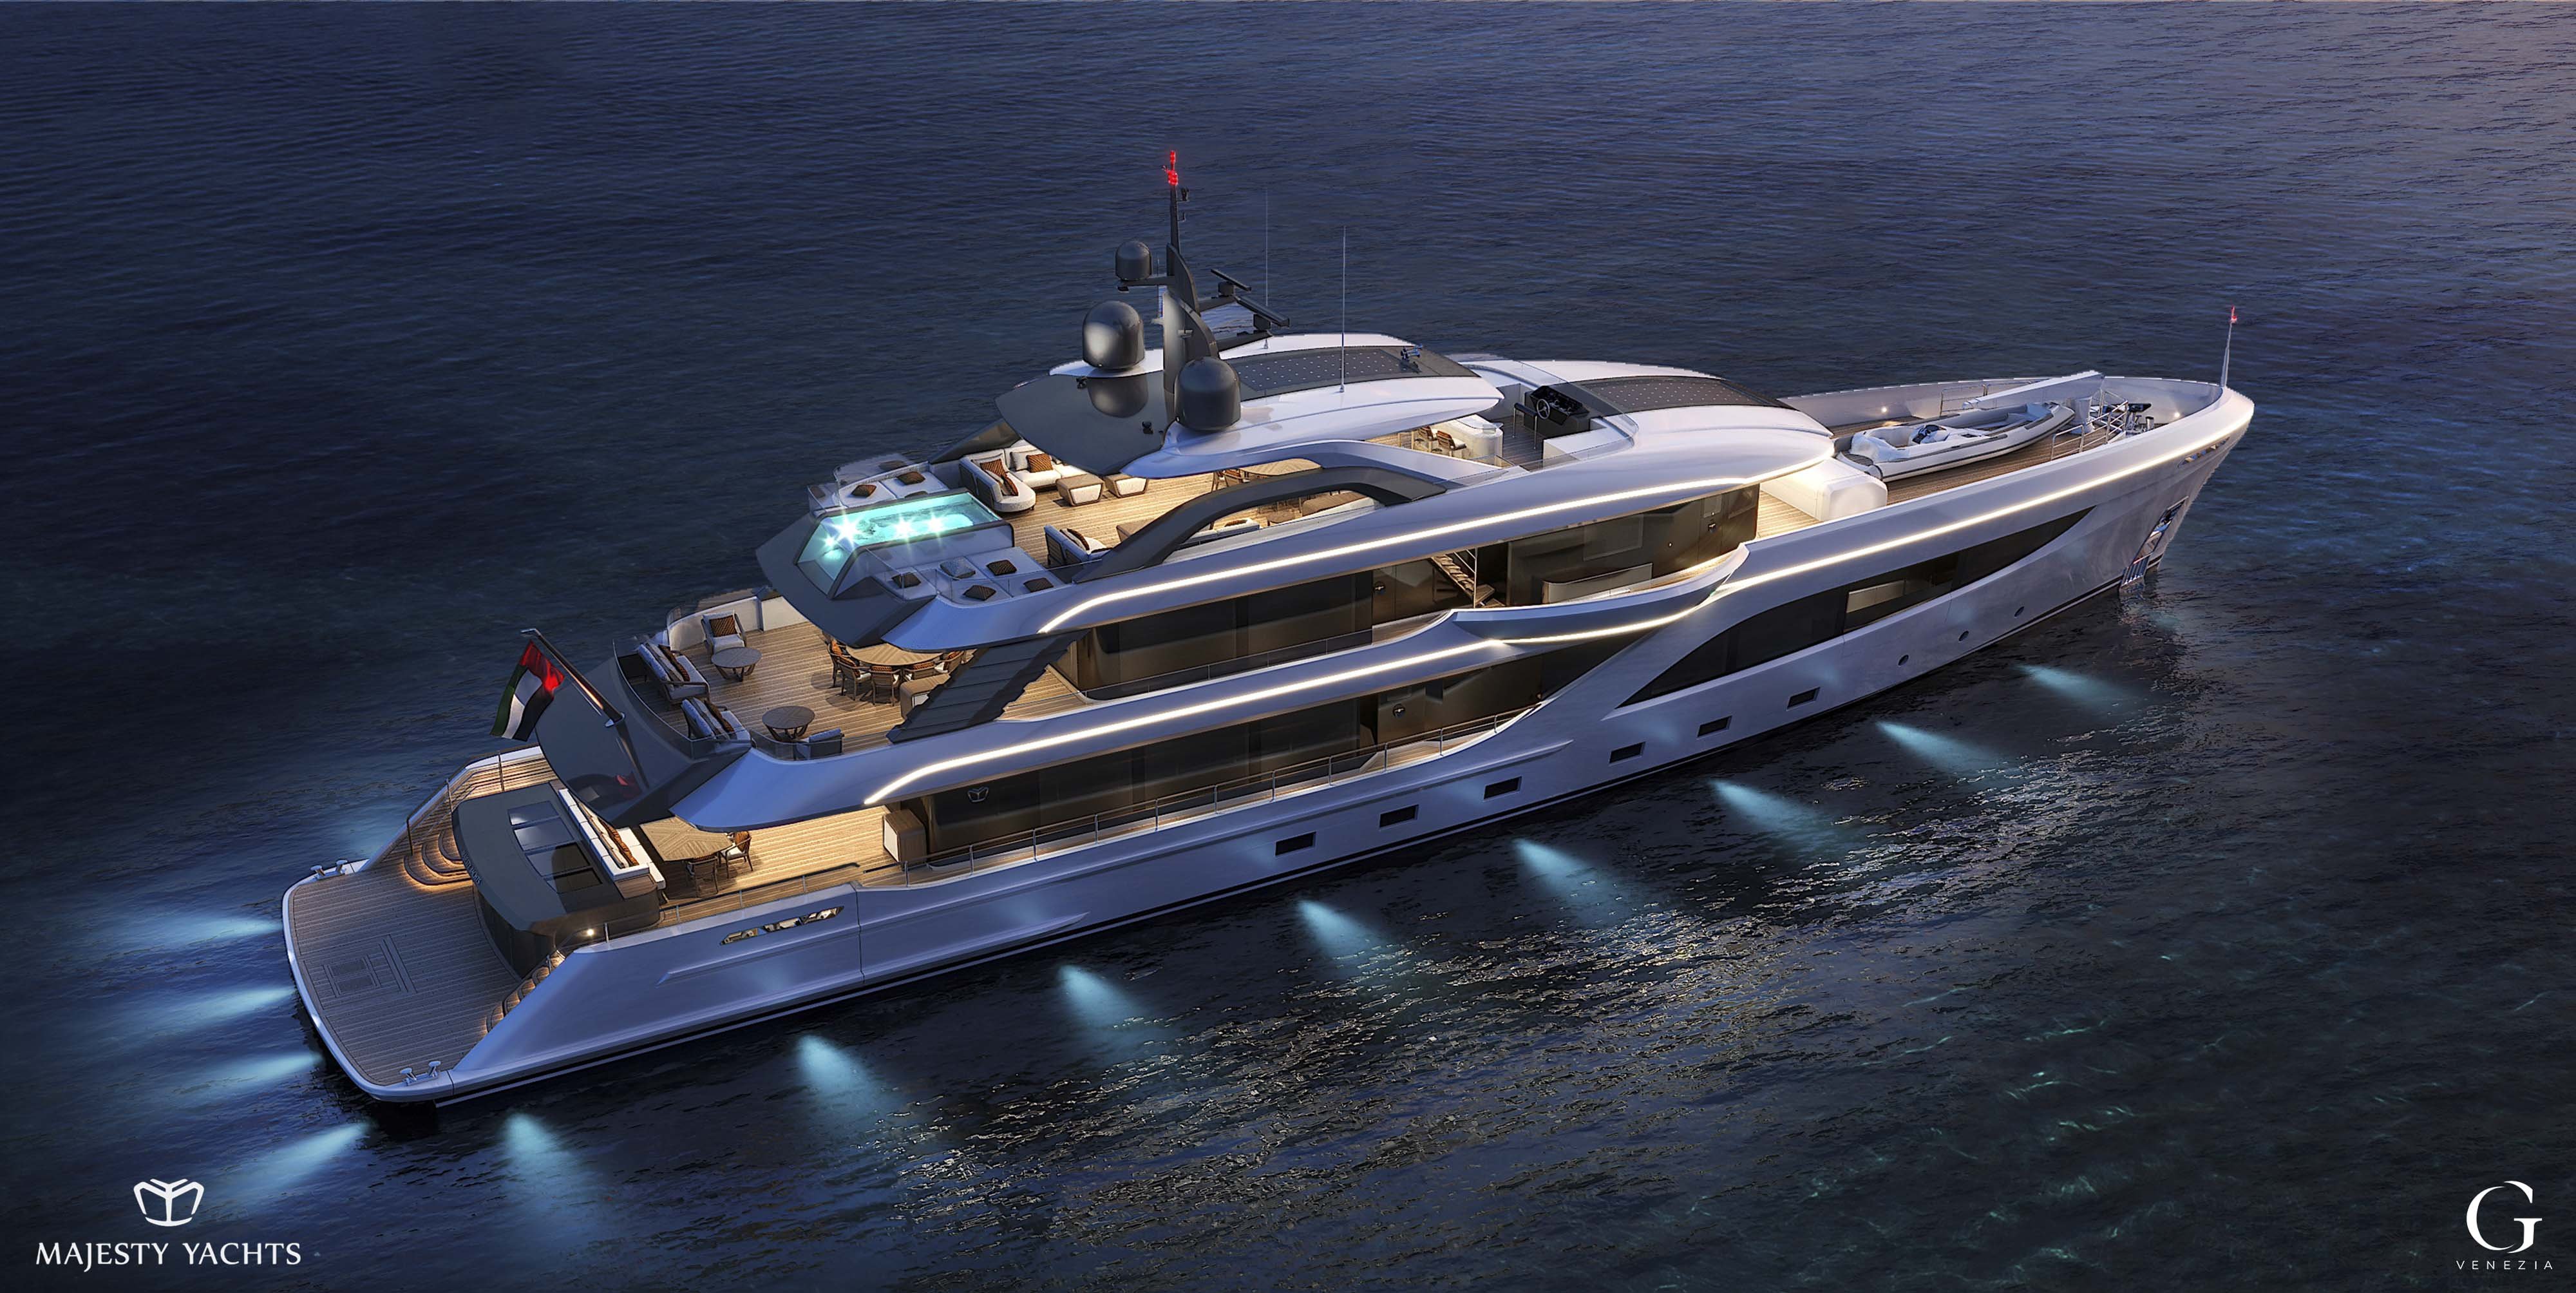 160 foot yacht cost